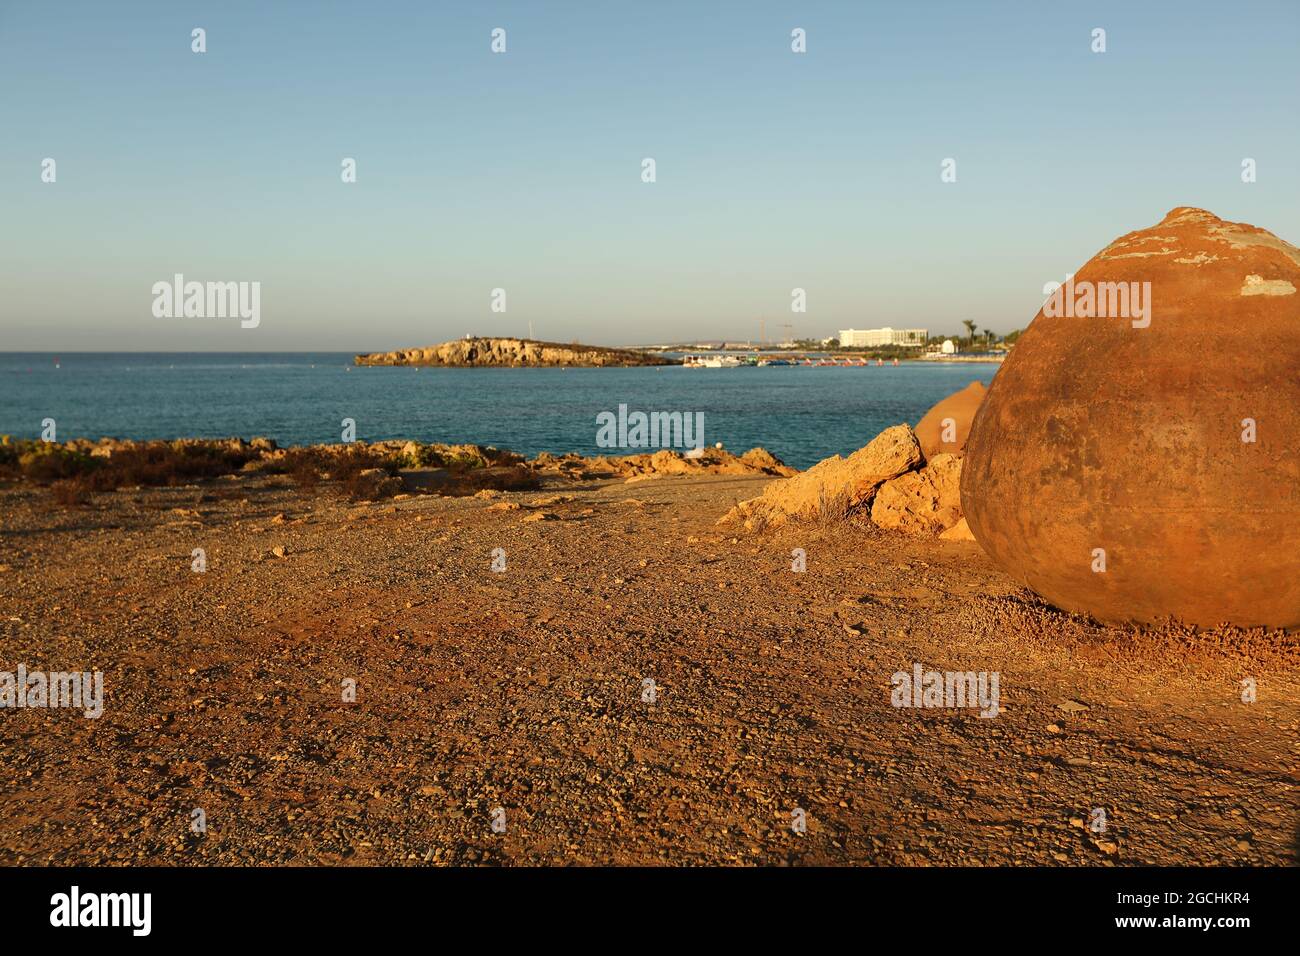 Beautiful early morning view with sandy beach in Aya Napa, Cyprus, landscape, nature, vacation. Stock Photo